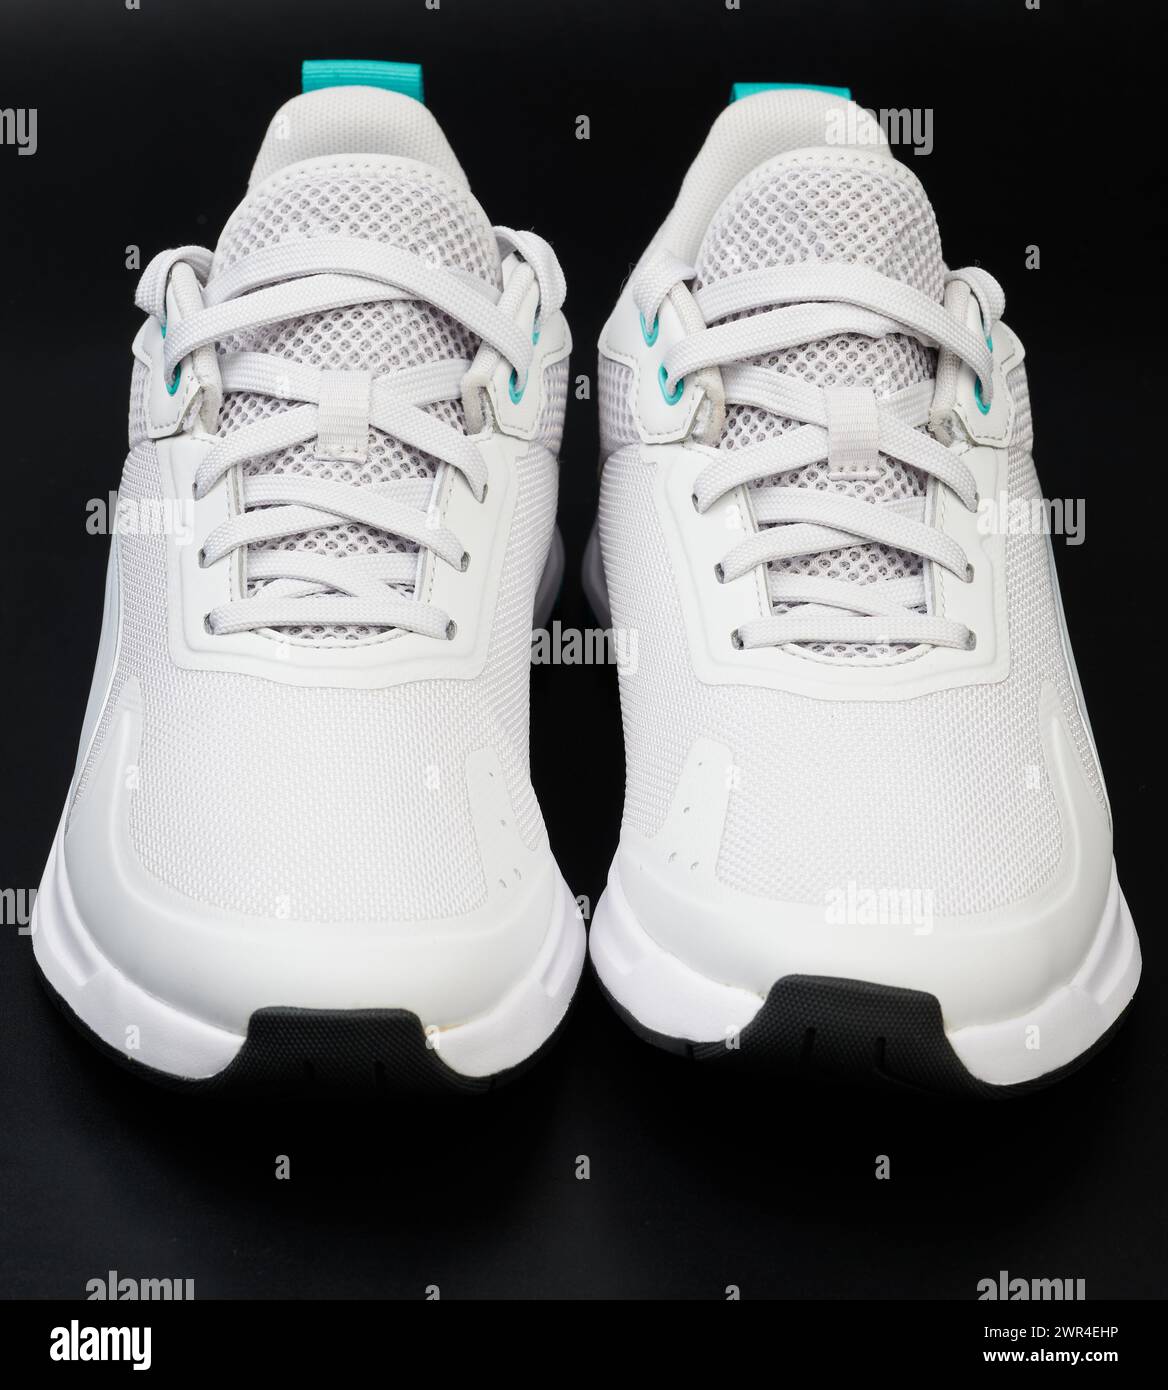 Clean new white pair of shoes front view isolated on black studio background Stock Photo